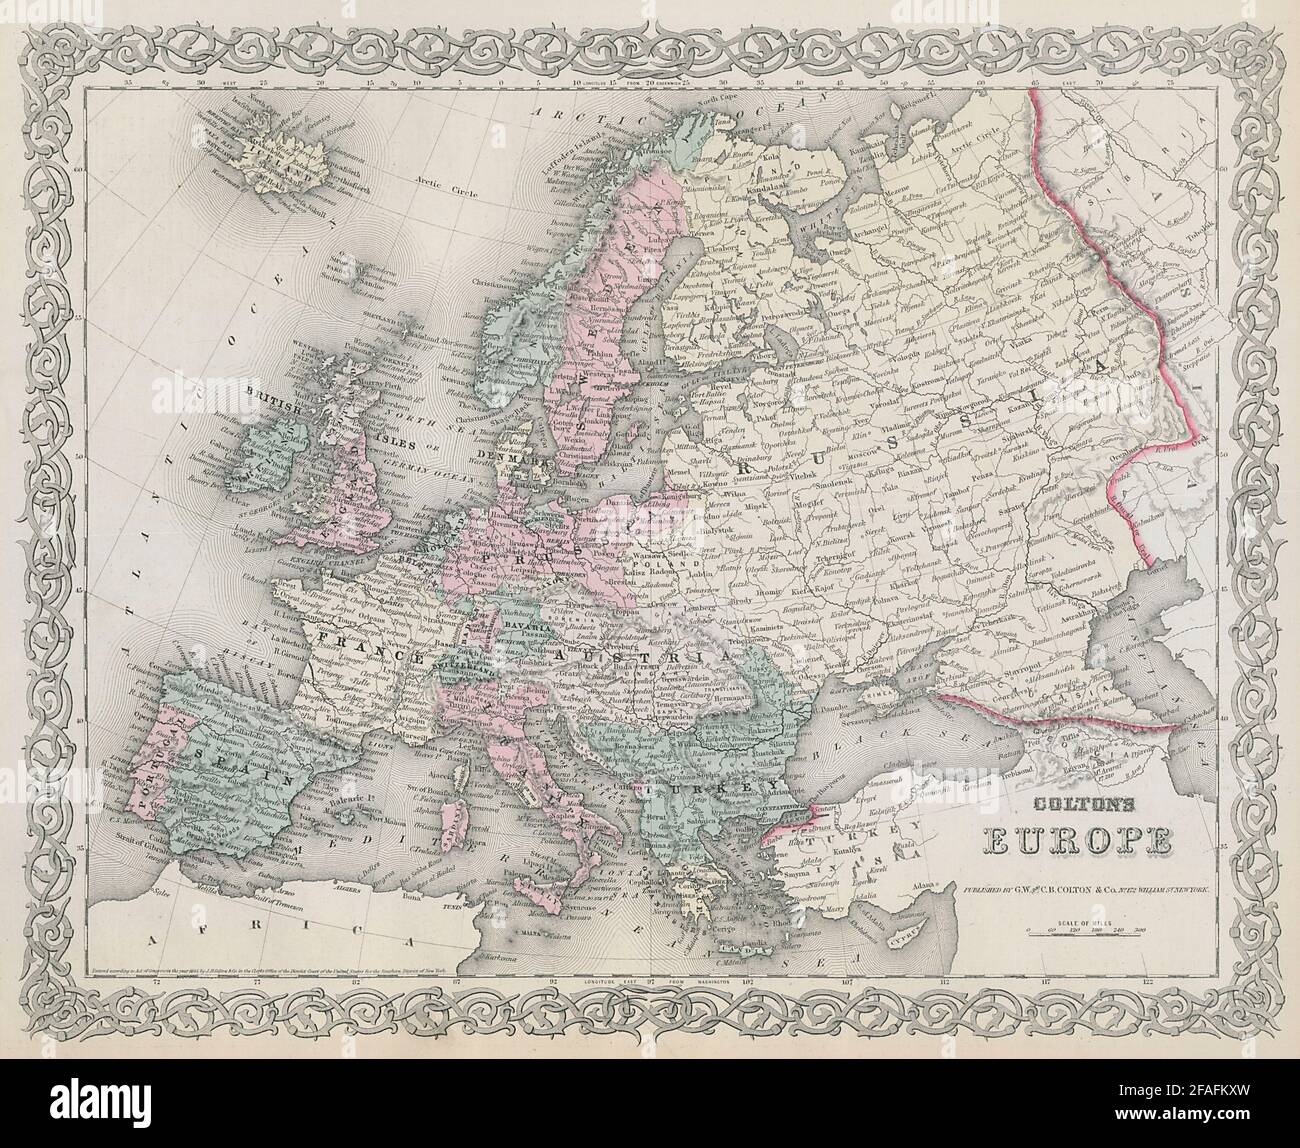 Colton's Europe. Decorative antique map 1869 old plan chart Stock Photo